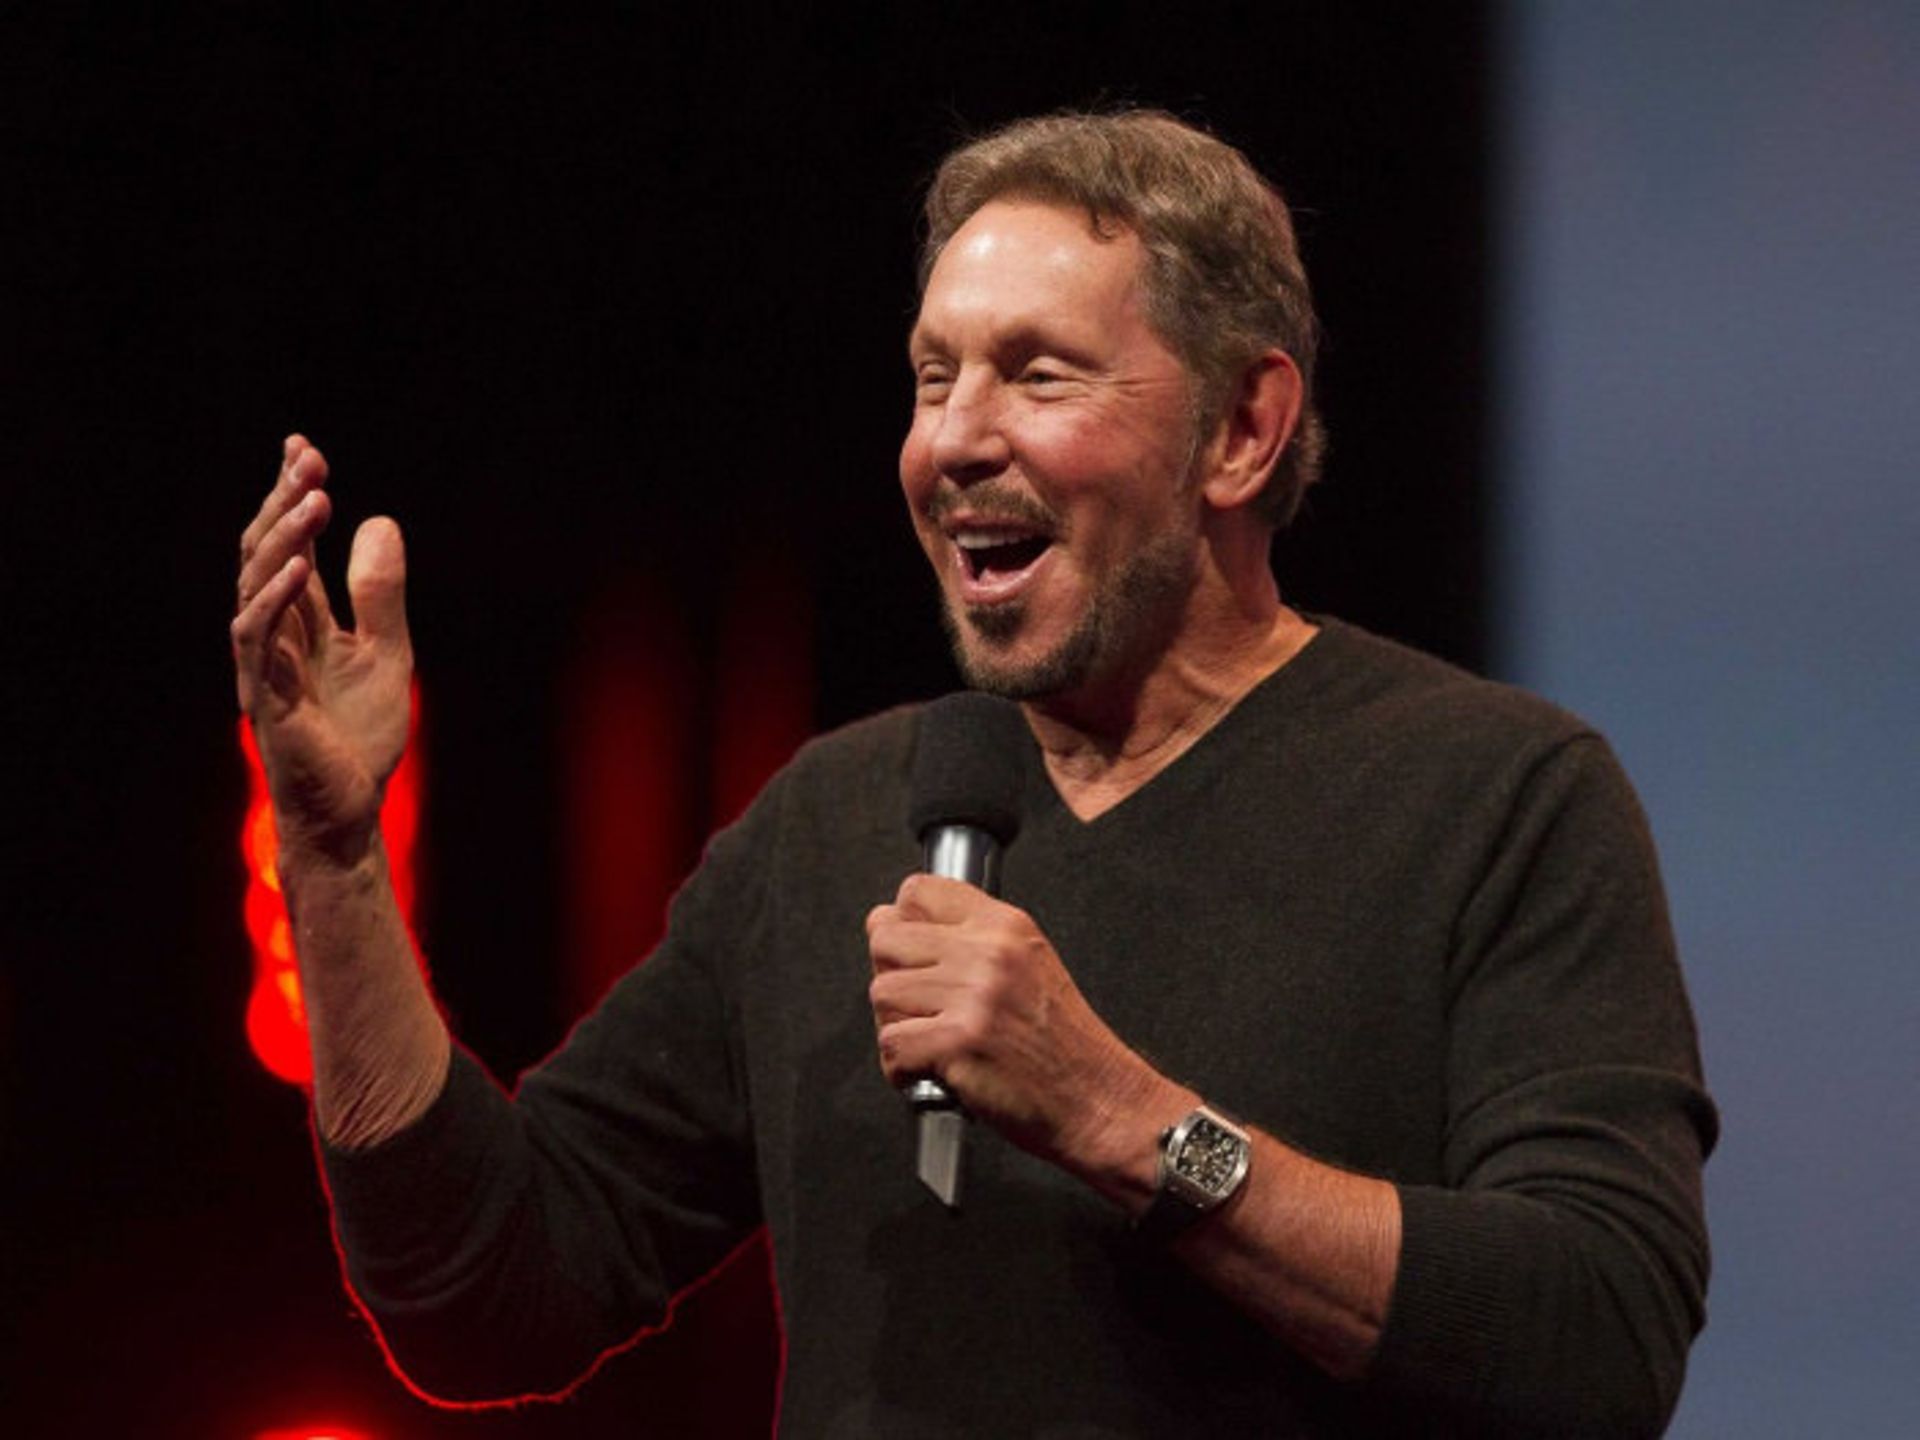 2-larry-ellison-is-the-cofounder-and-former-ceo-of-oracle